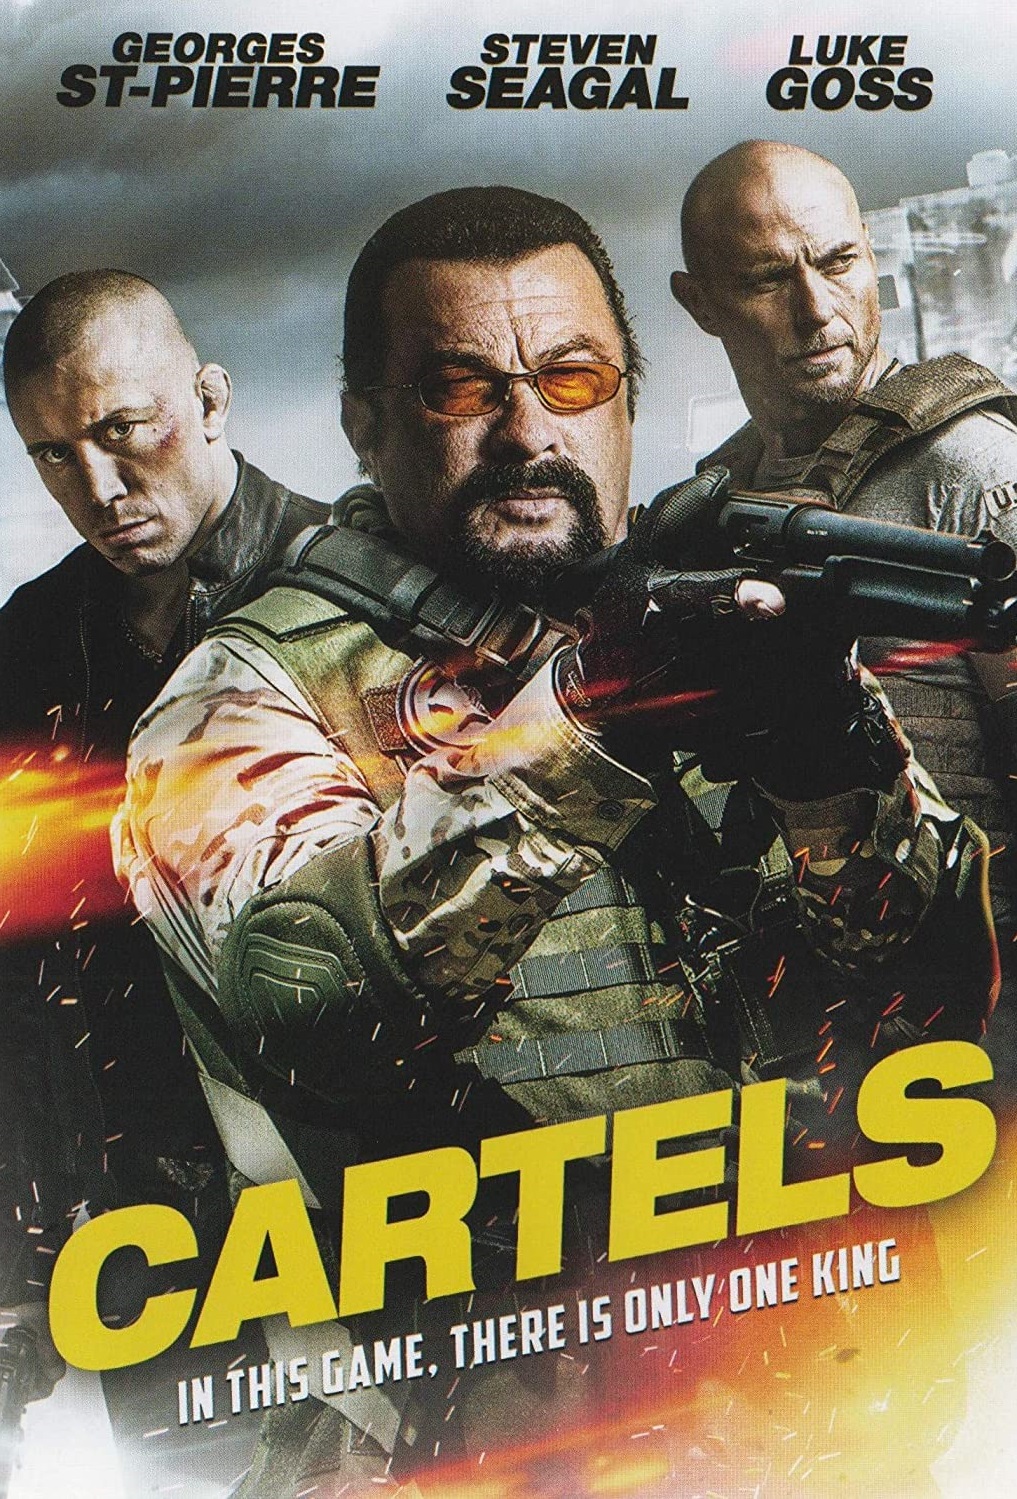 Cartels 2017 Tamil Dubbed Action Movie Online